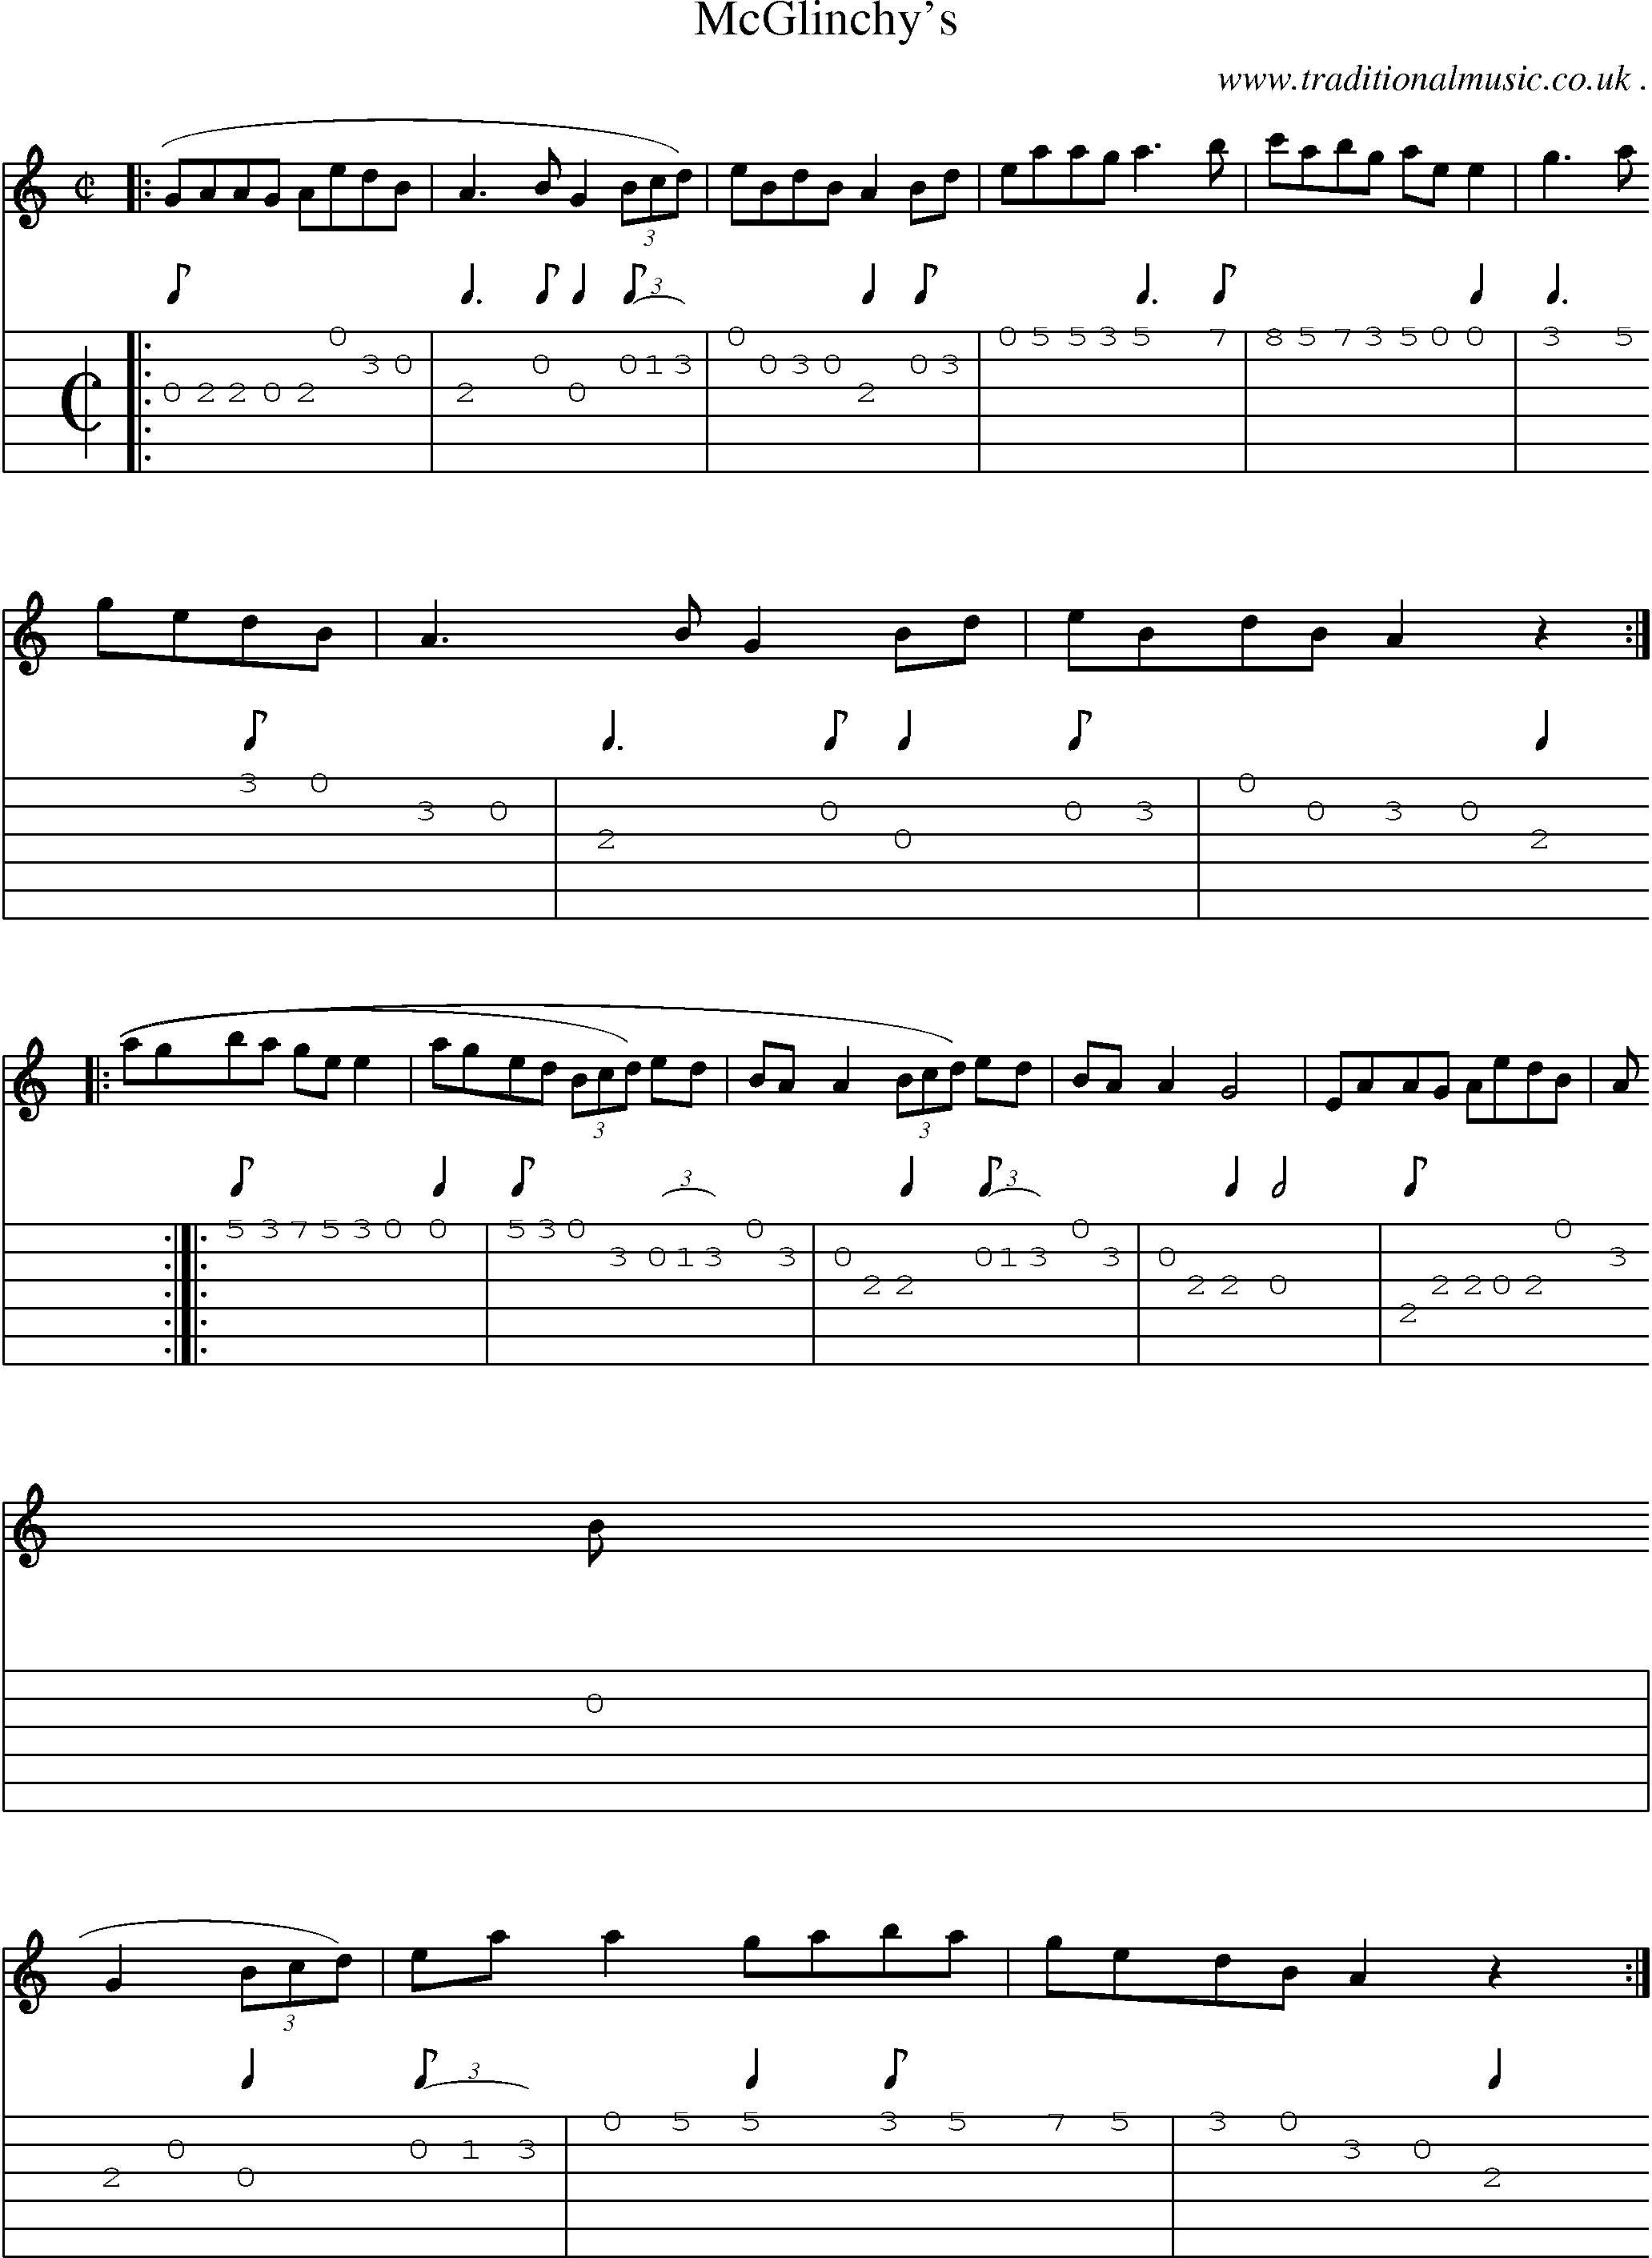 Sheet-Music and Guitar Tabs for Mcglinchys